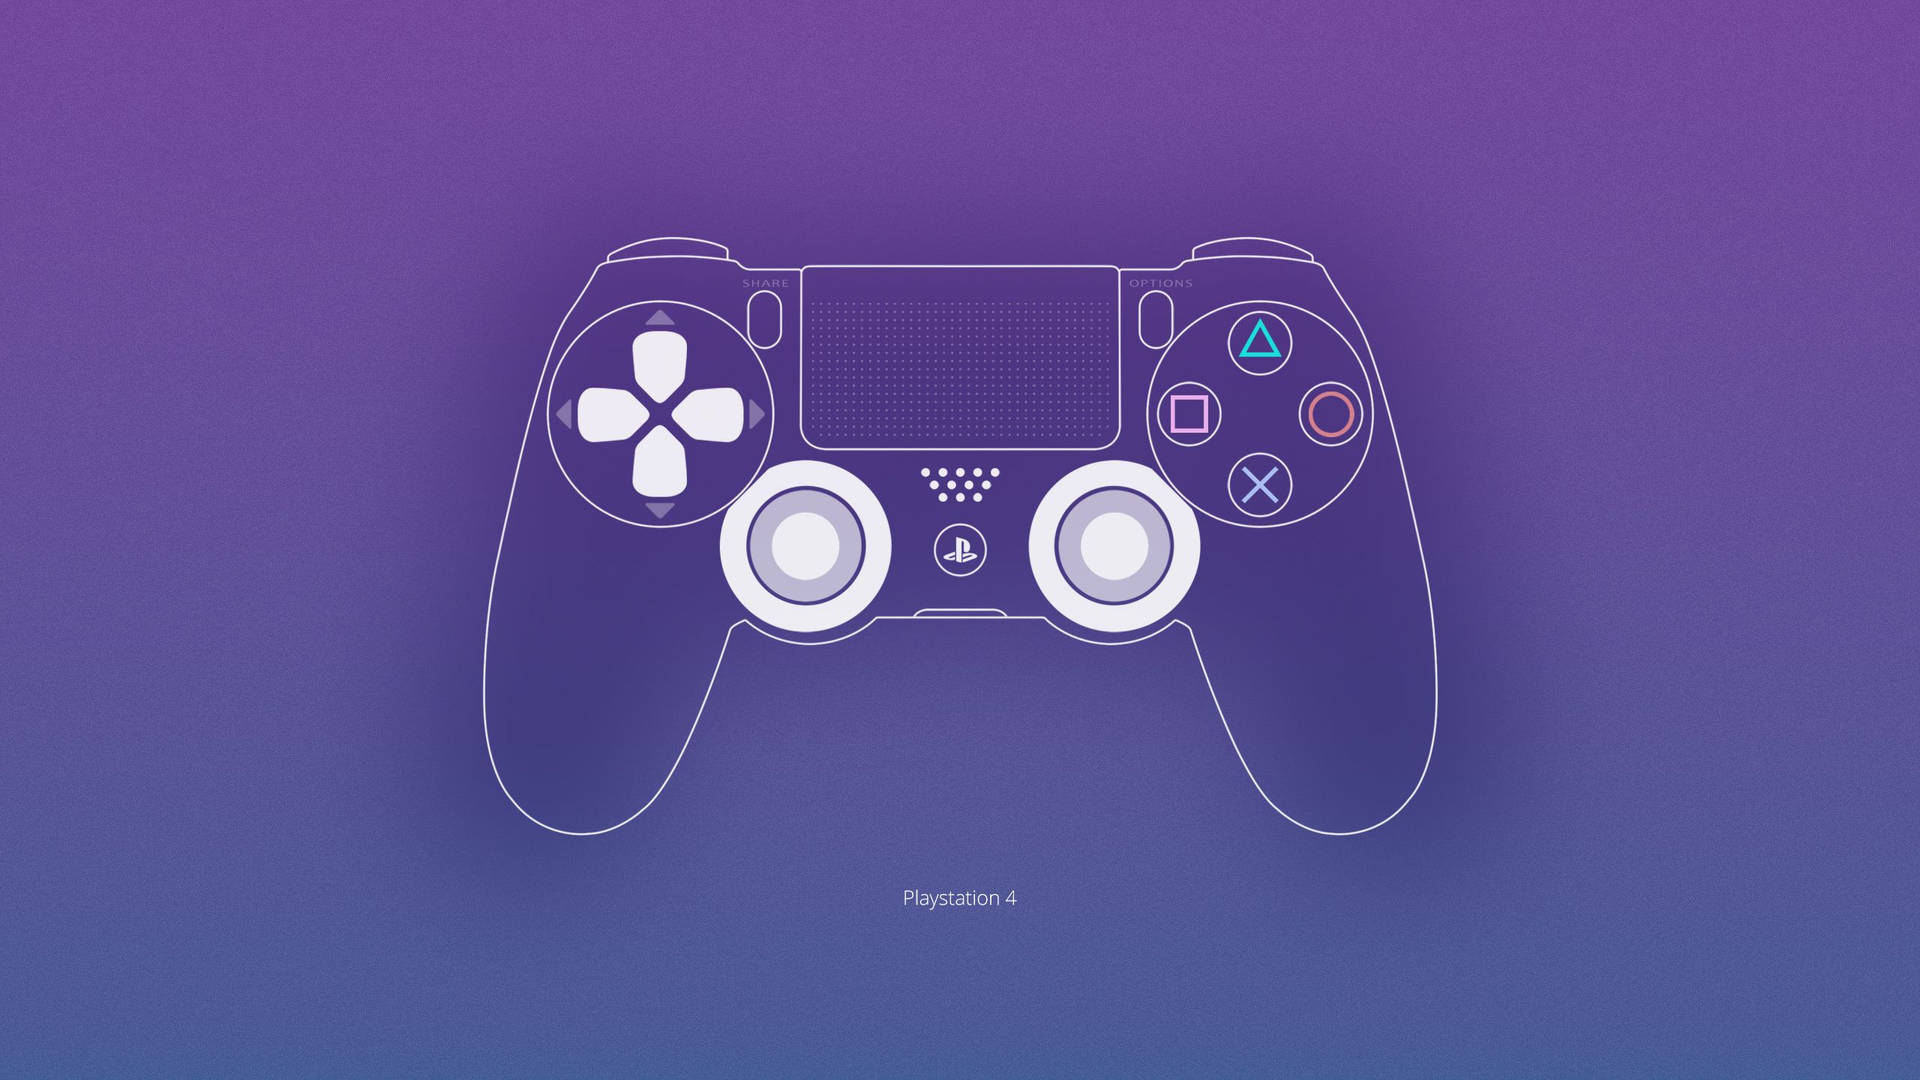 Unleash your gaming experience with the Sony PlayStation DualShock 4 wireless controller. Wallpaper